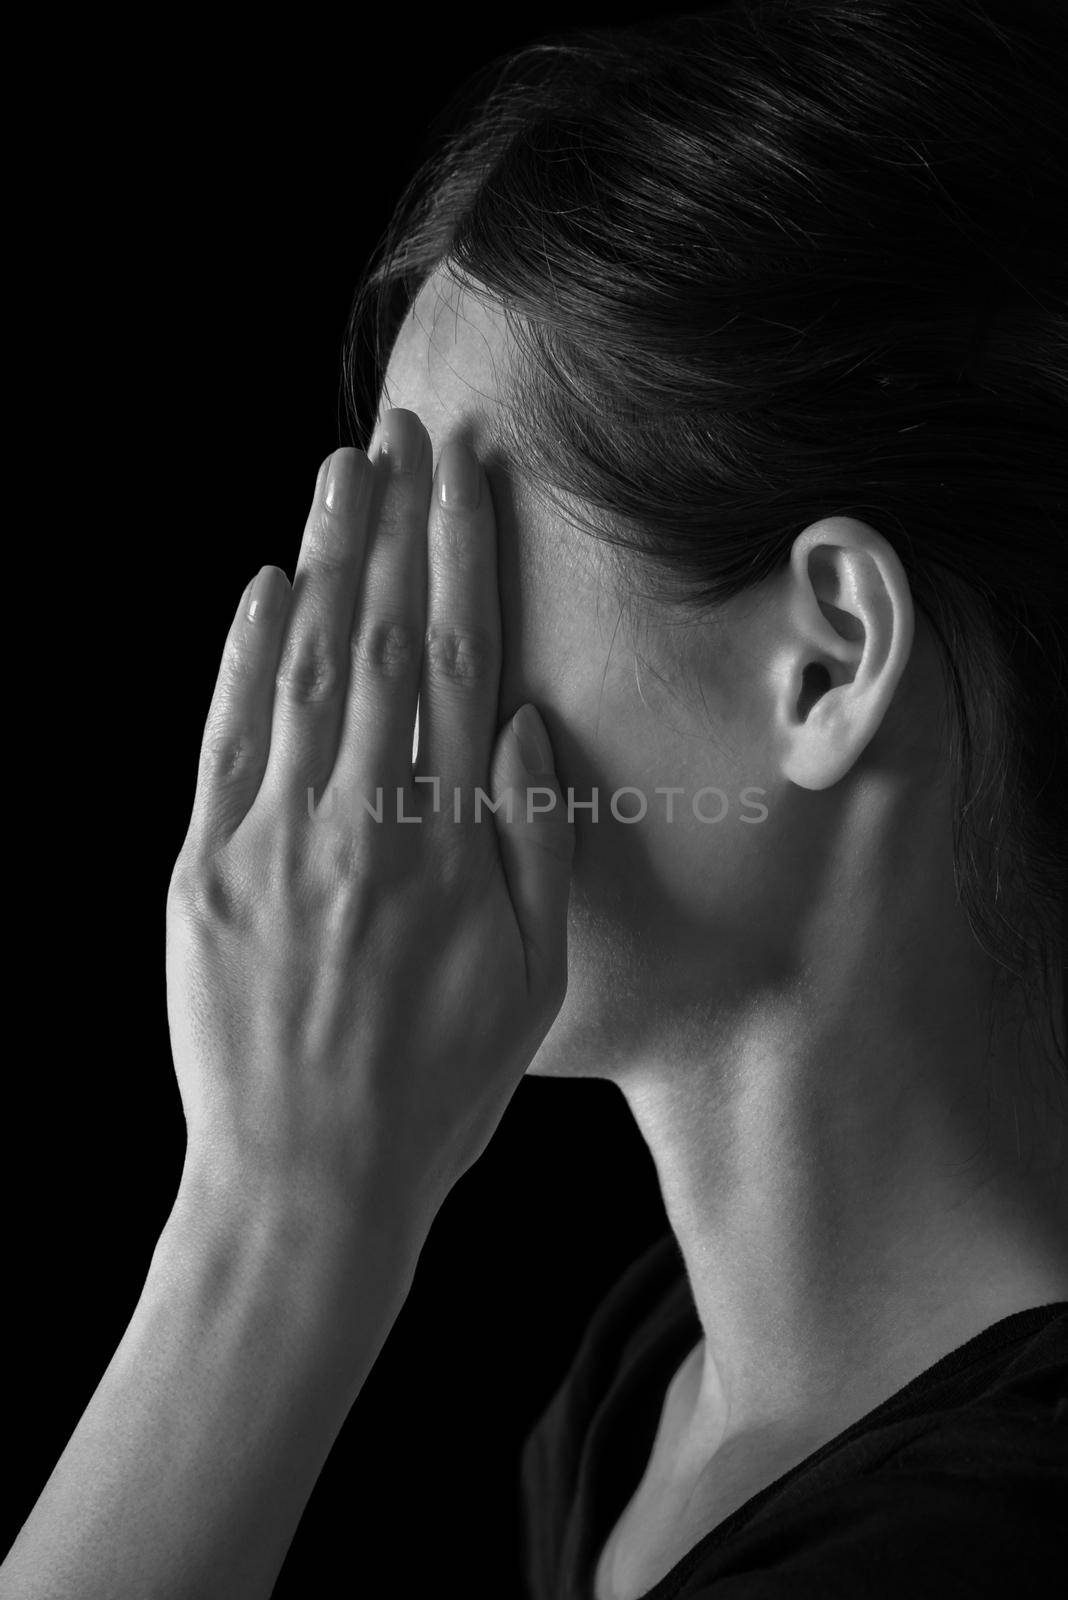 Woman closes her face by hand, tired woman, monochrome image